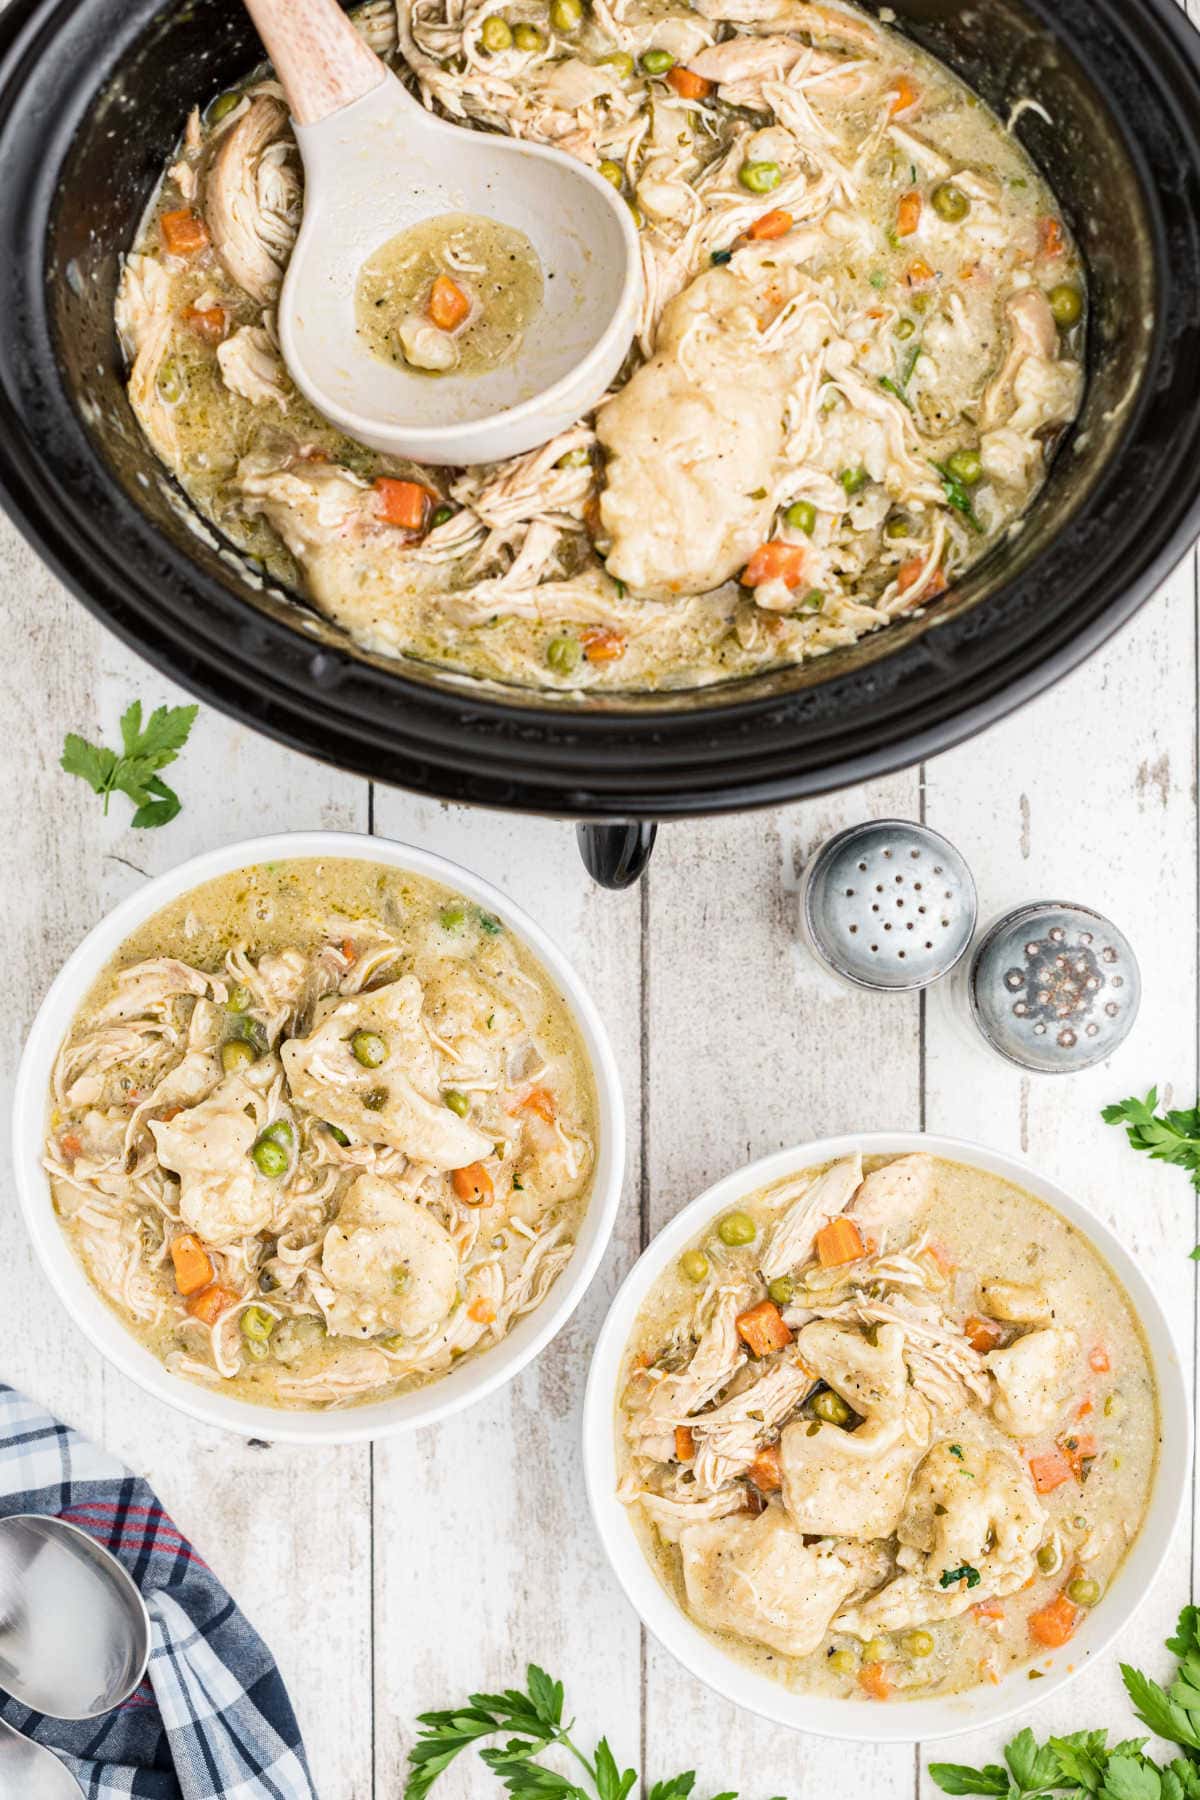 Two bowls filled with chicken and dumplings.